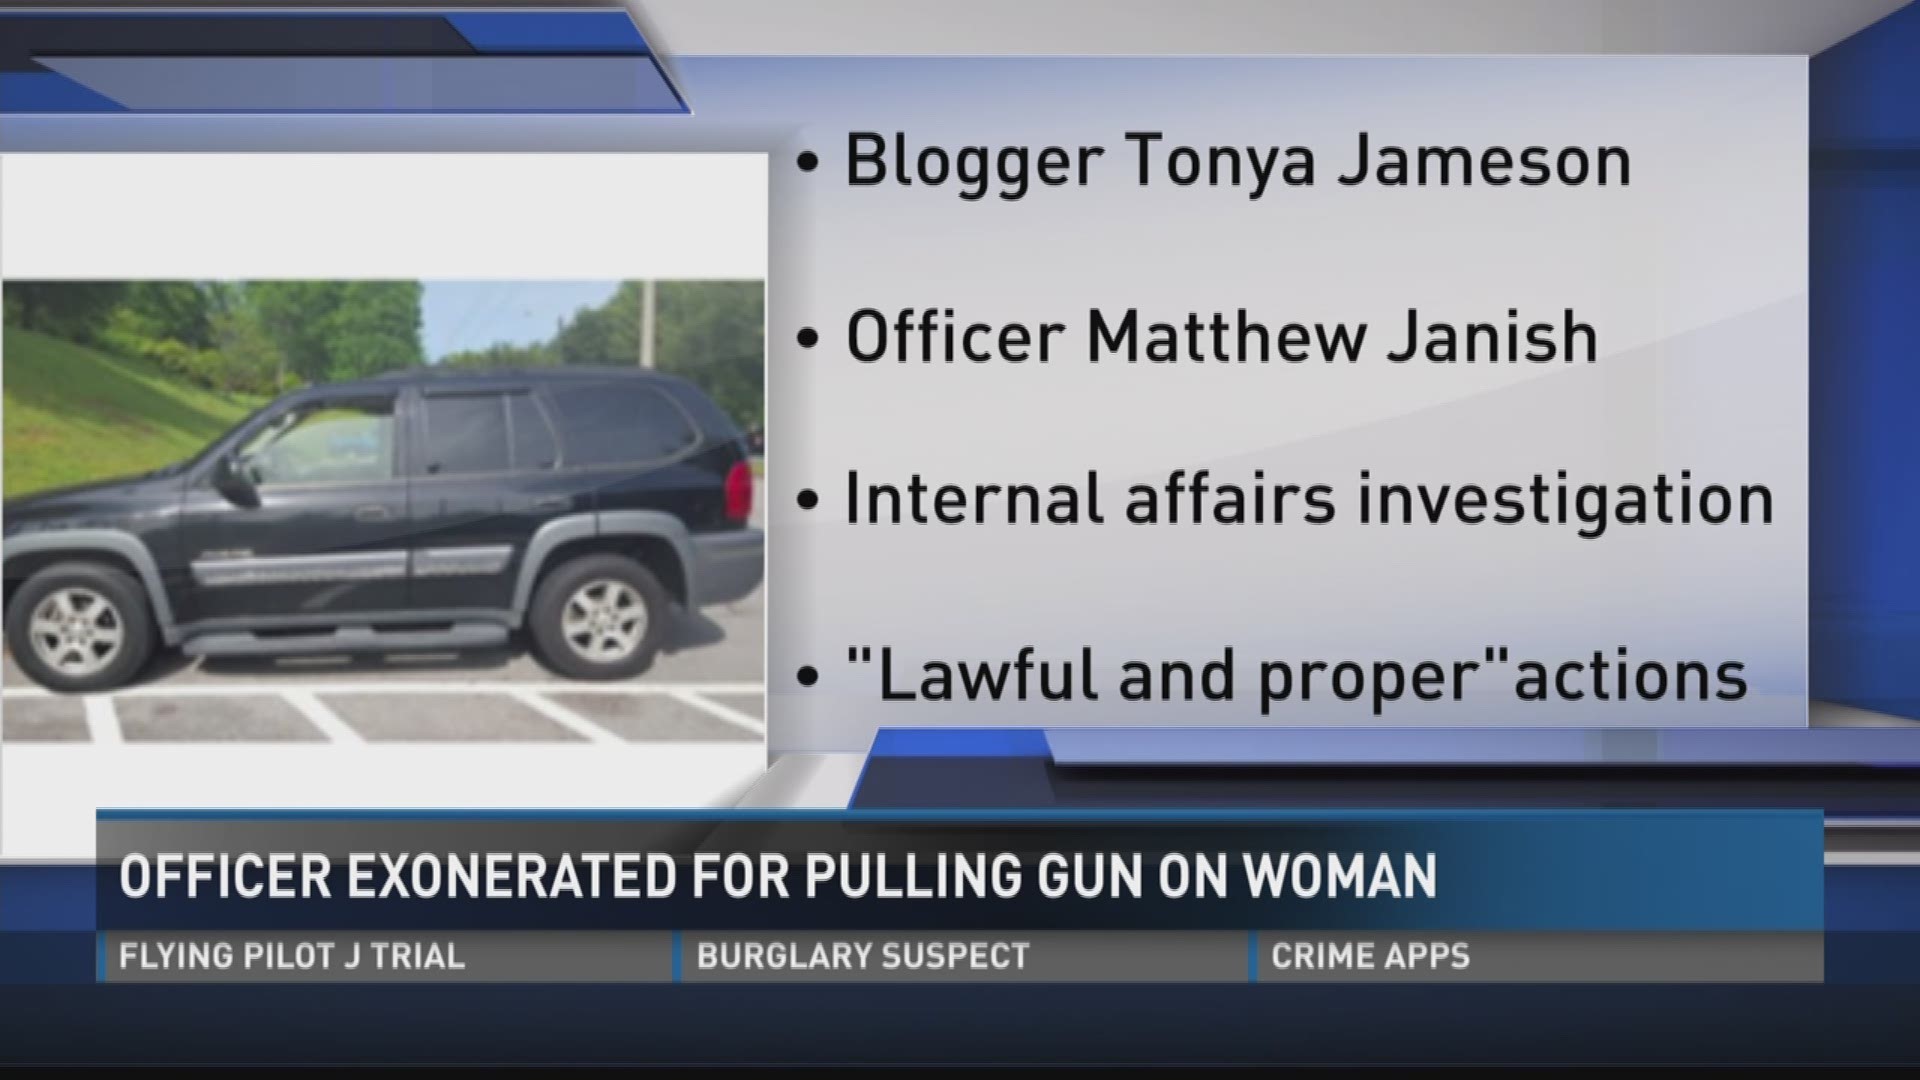 June 20, 2017: An Internal Affairs investigation cleared a Knoxville police officer after he pulled a gun on North Carolina woman while off duty.